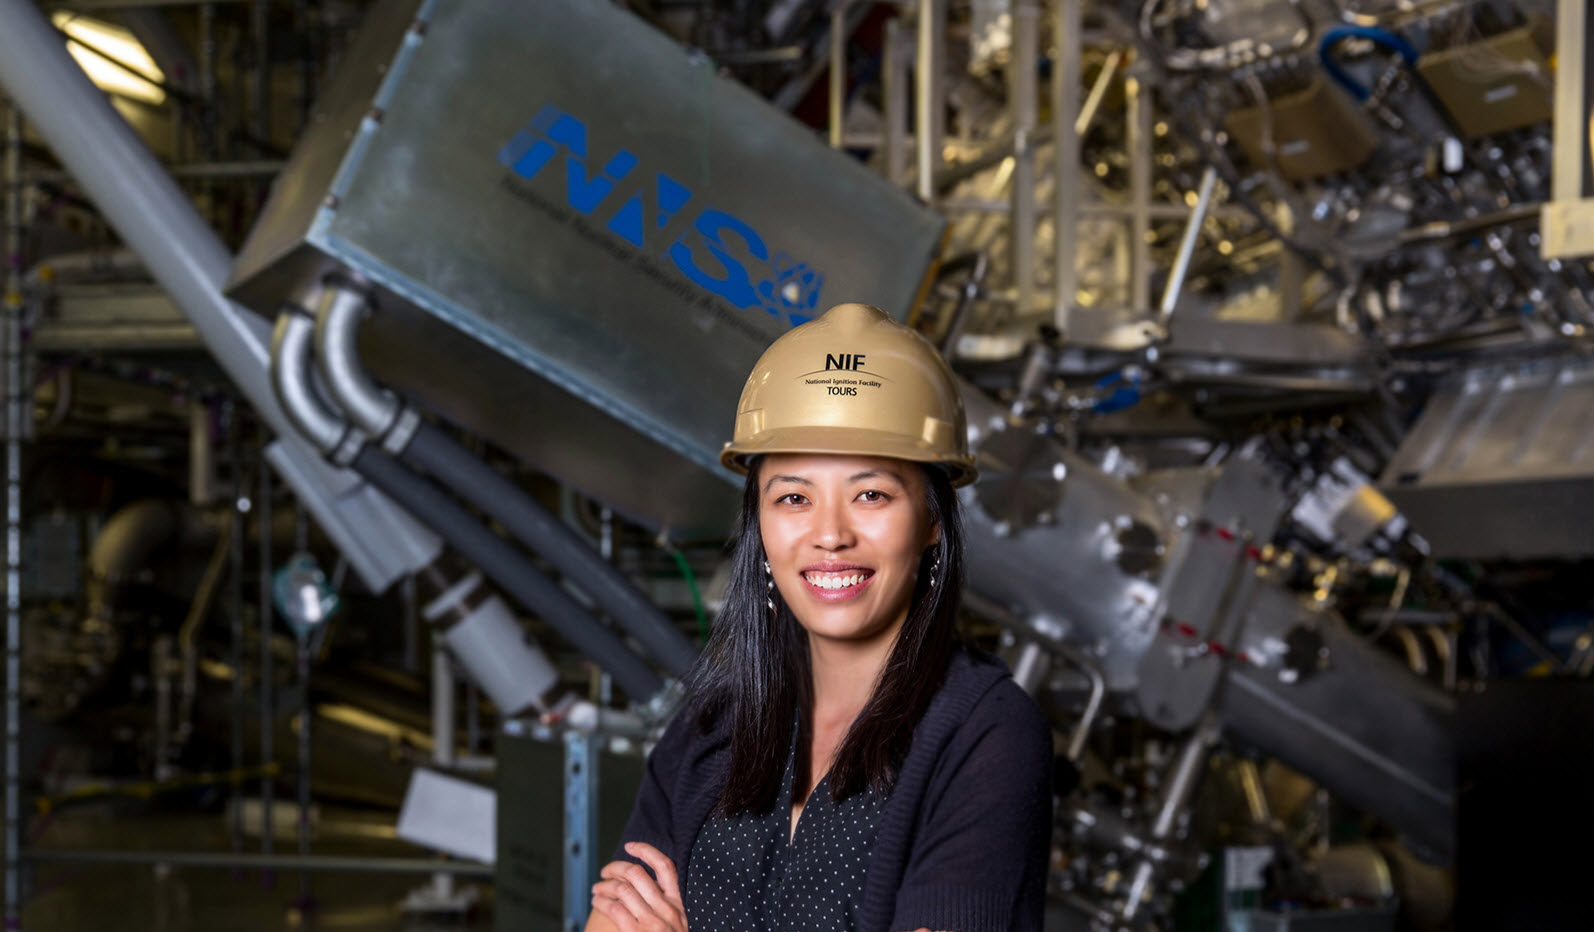 HEDS researcher Tammy Ma poses in front of the National Ignition Facility taregt chamber